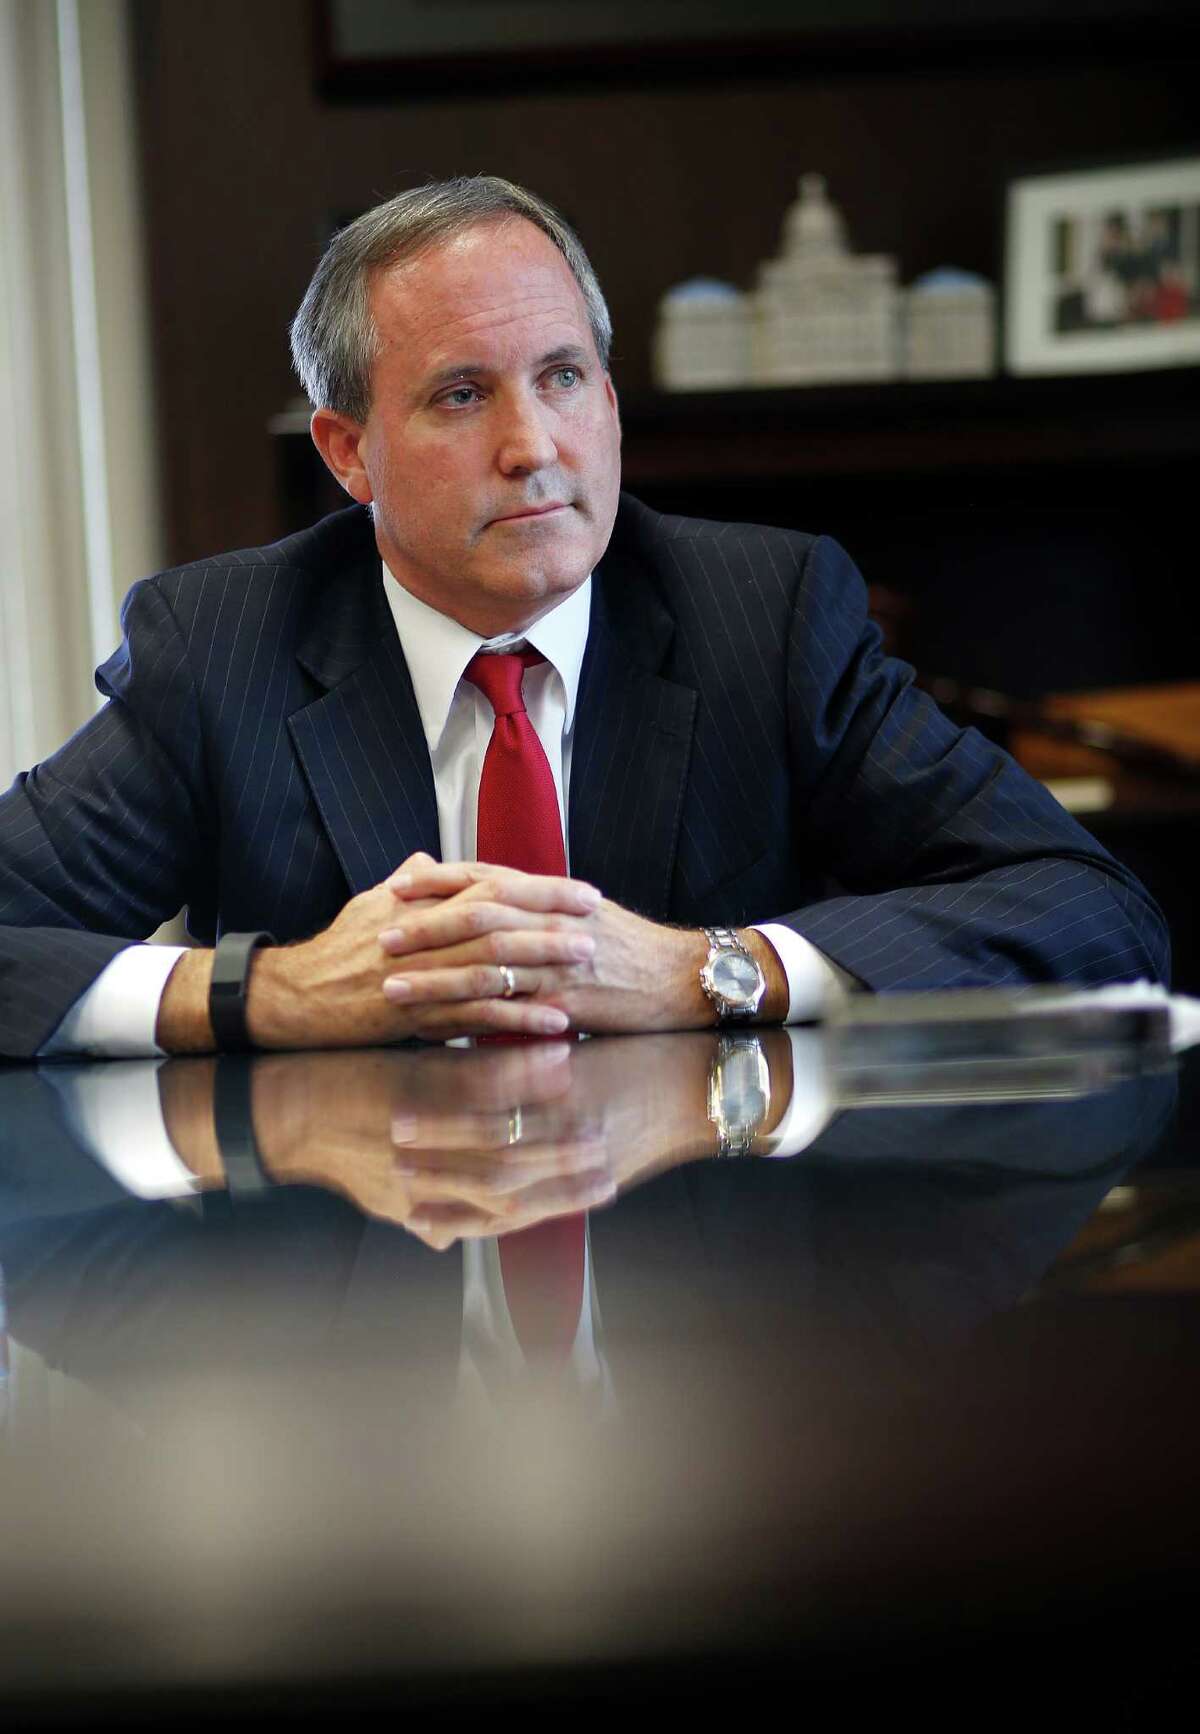 Texas Attorney General Ken Paxton is indicted on three felony counts.